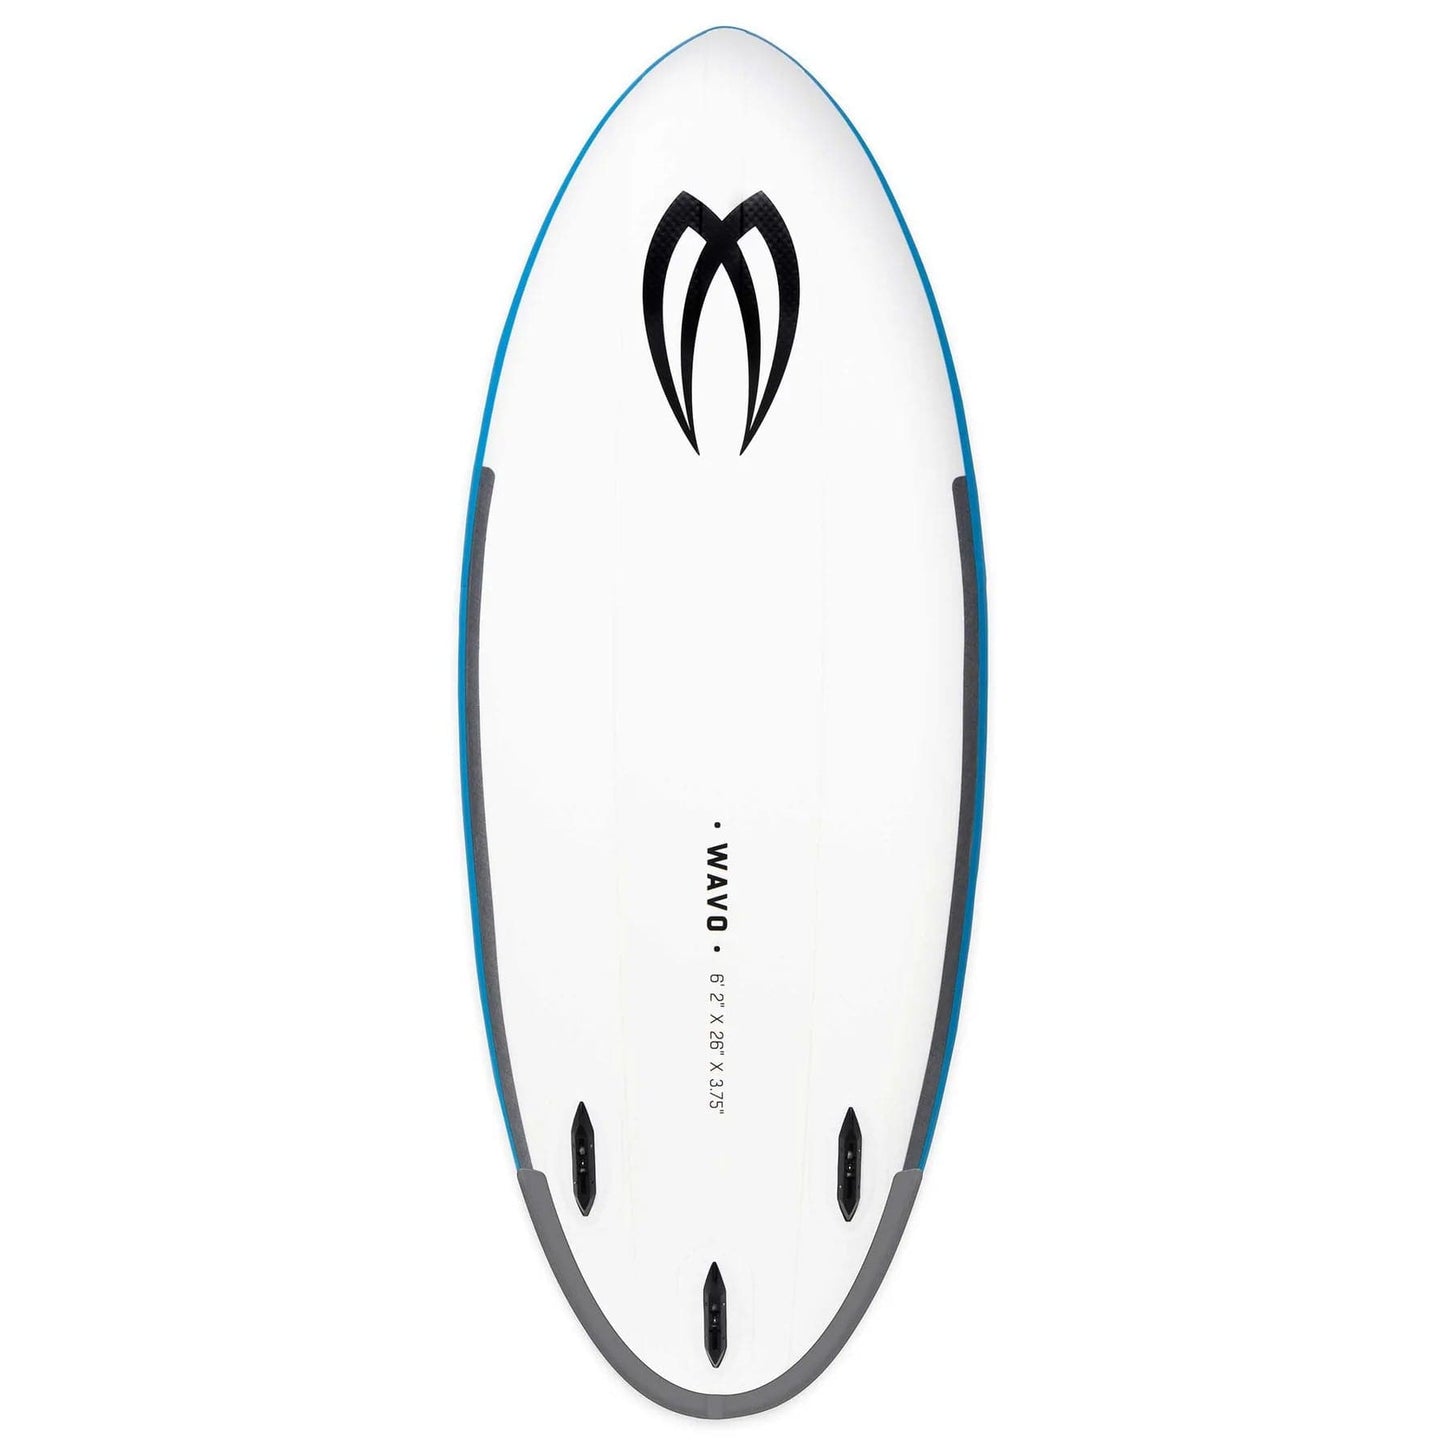 Featuring the Wavo Wiki beginner sup, river surfing, whitewater sup manufactured by Badfish shown here from a third angle.